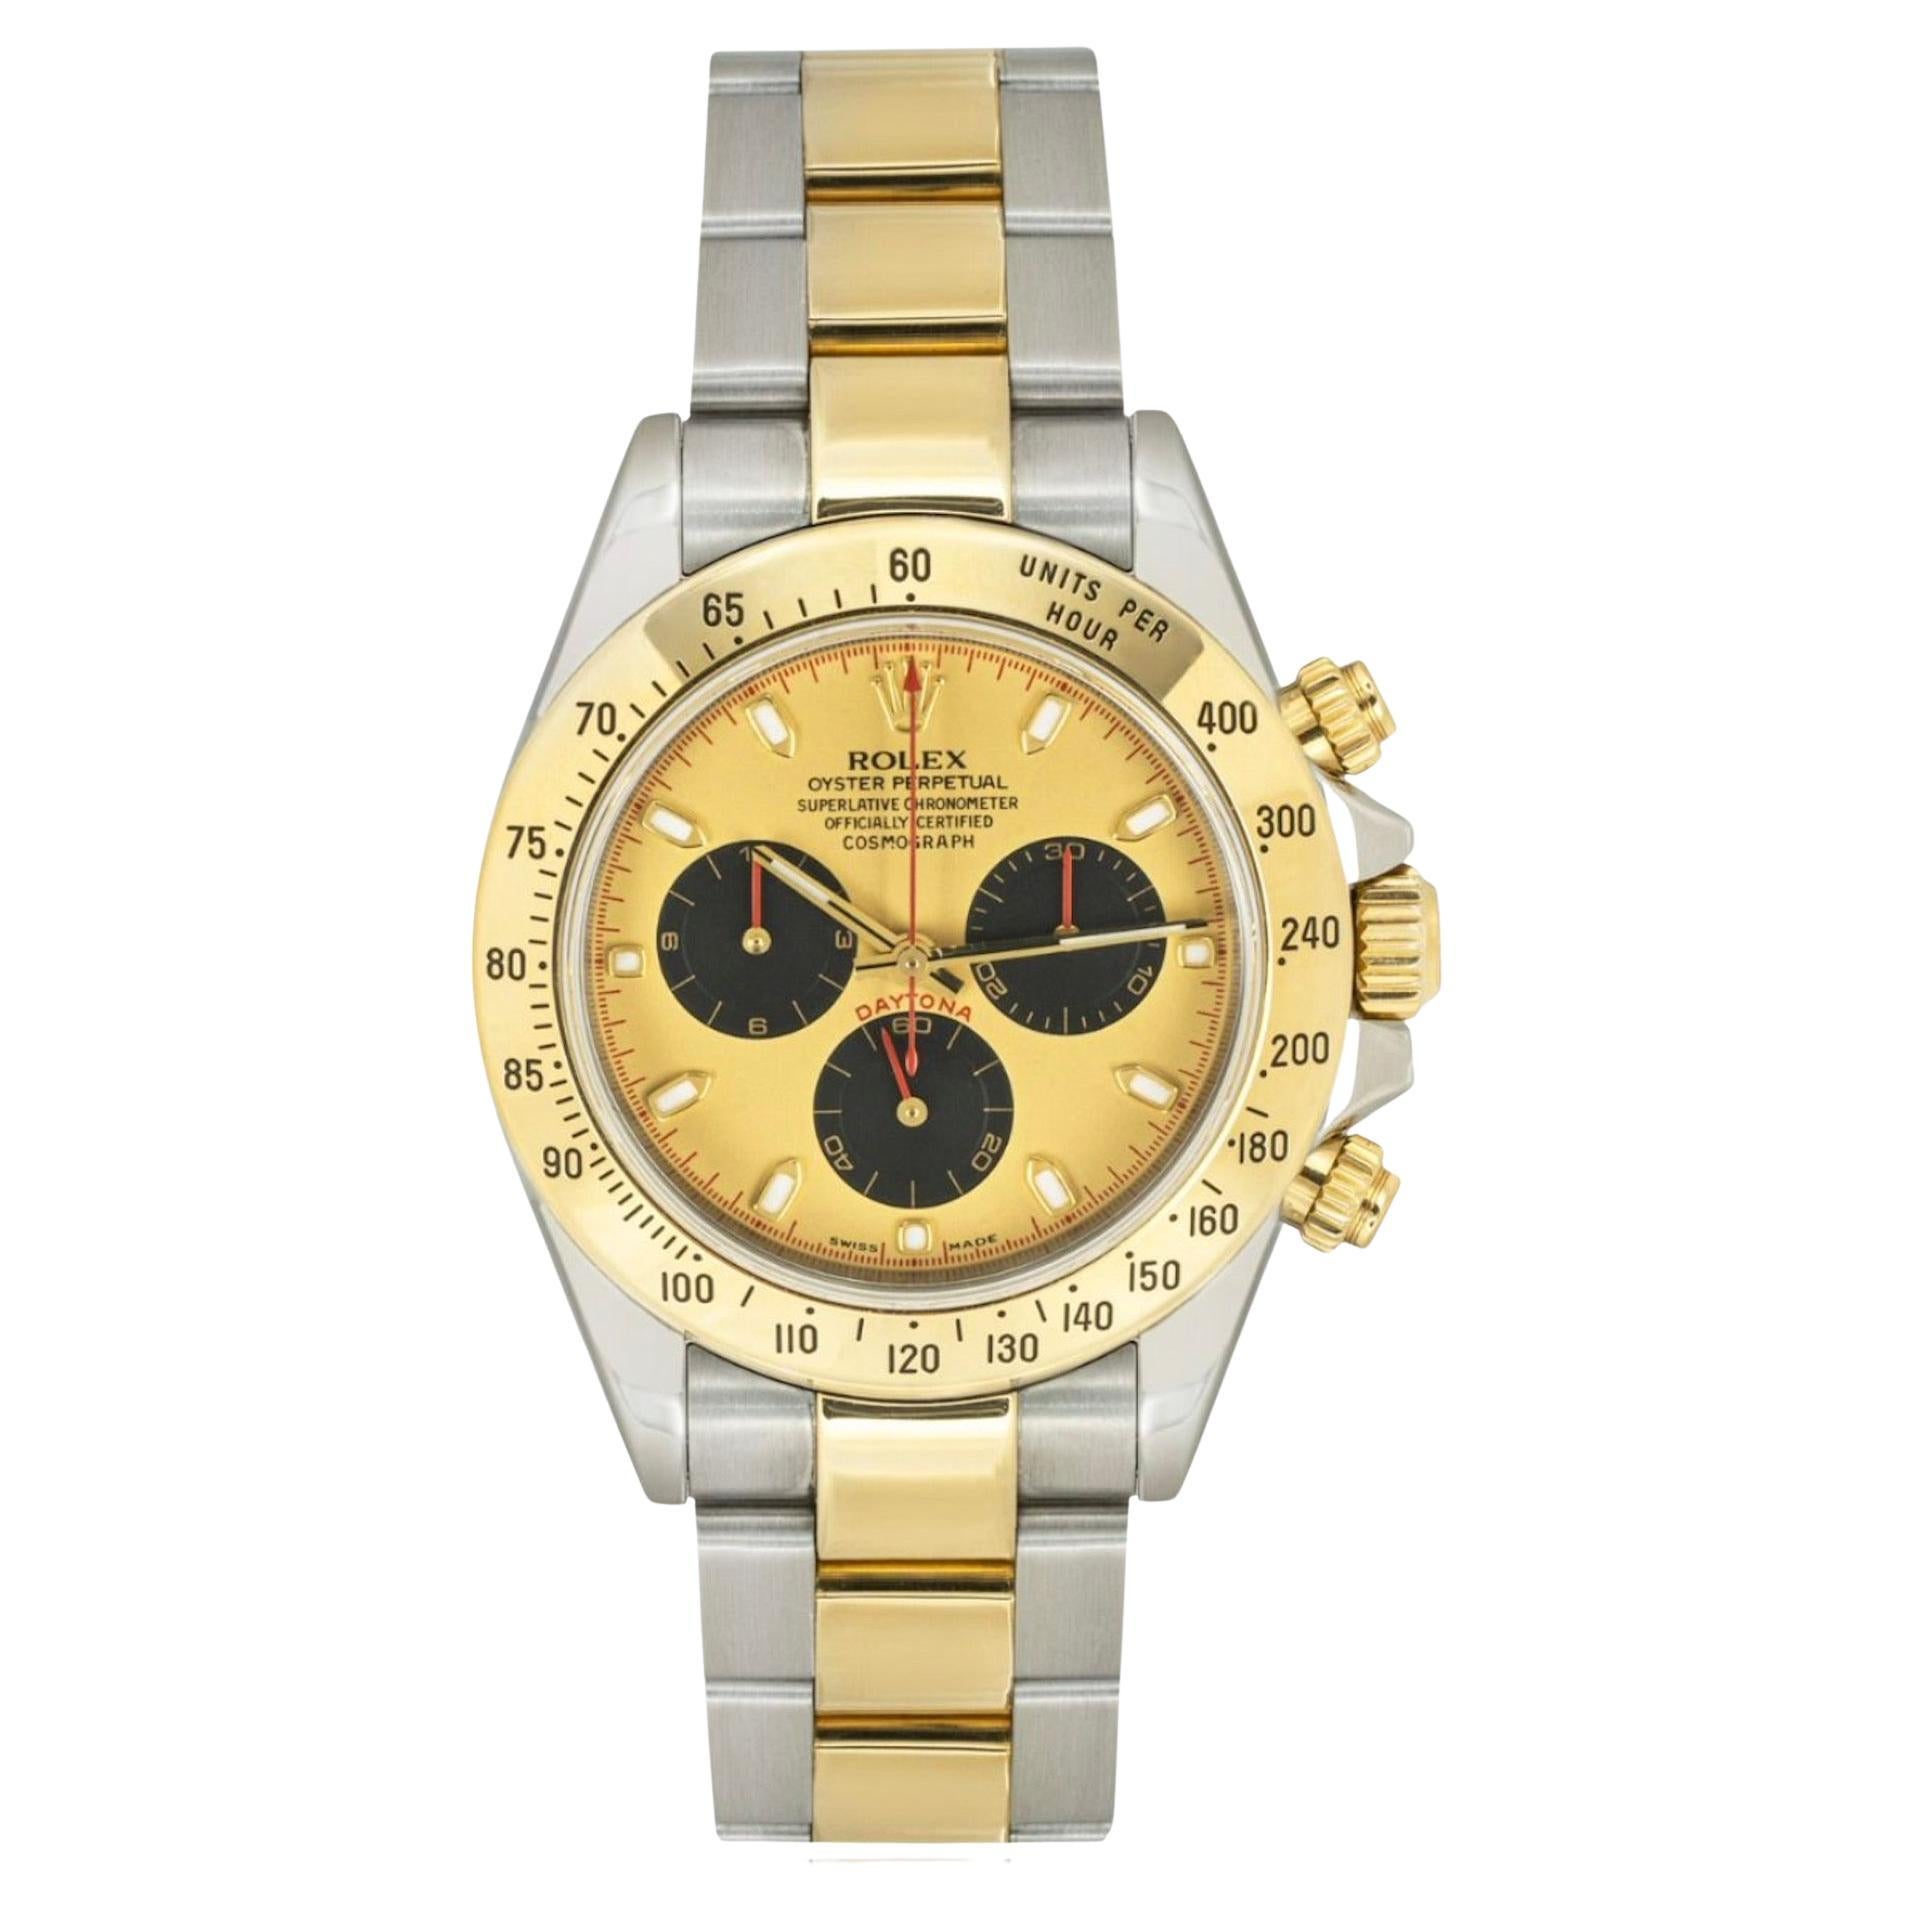 A Daytona in Oystersteel and yellow gold by Rolex. Featuring a champagne dial with an engraved tachymetric scale, three black chronograph counters and pushers, the Daytona was designed to be the ultimate timing tool for endurance racing